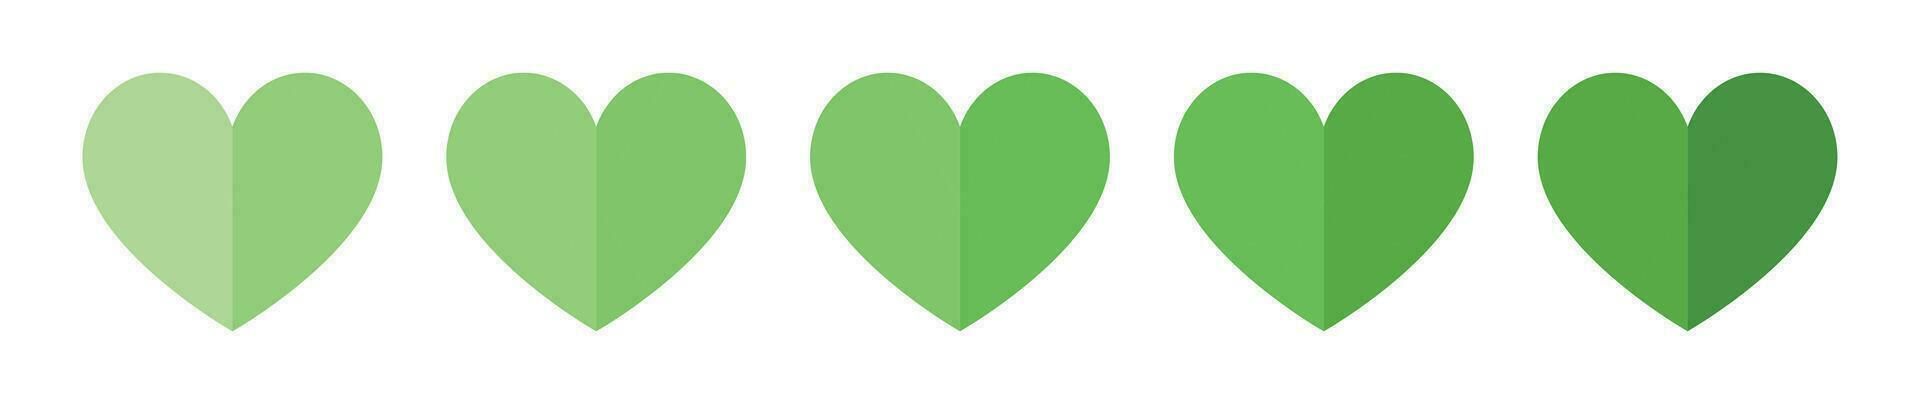 Heart shape eco green icon set with white background. vector